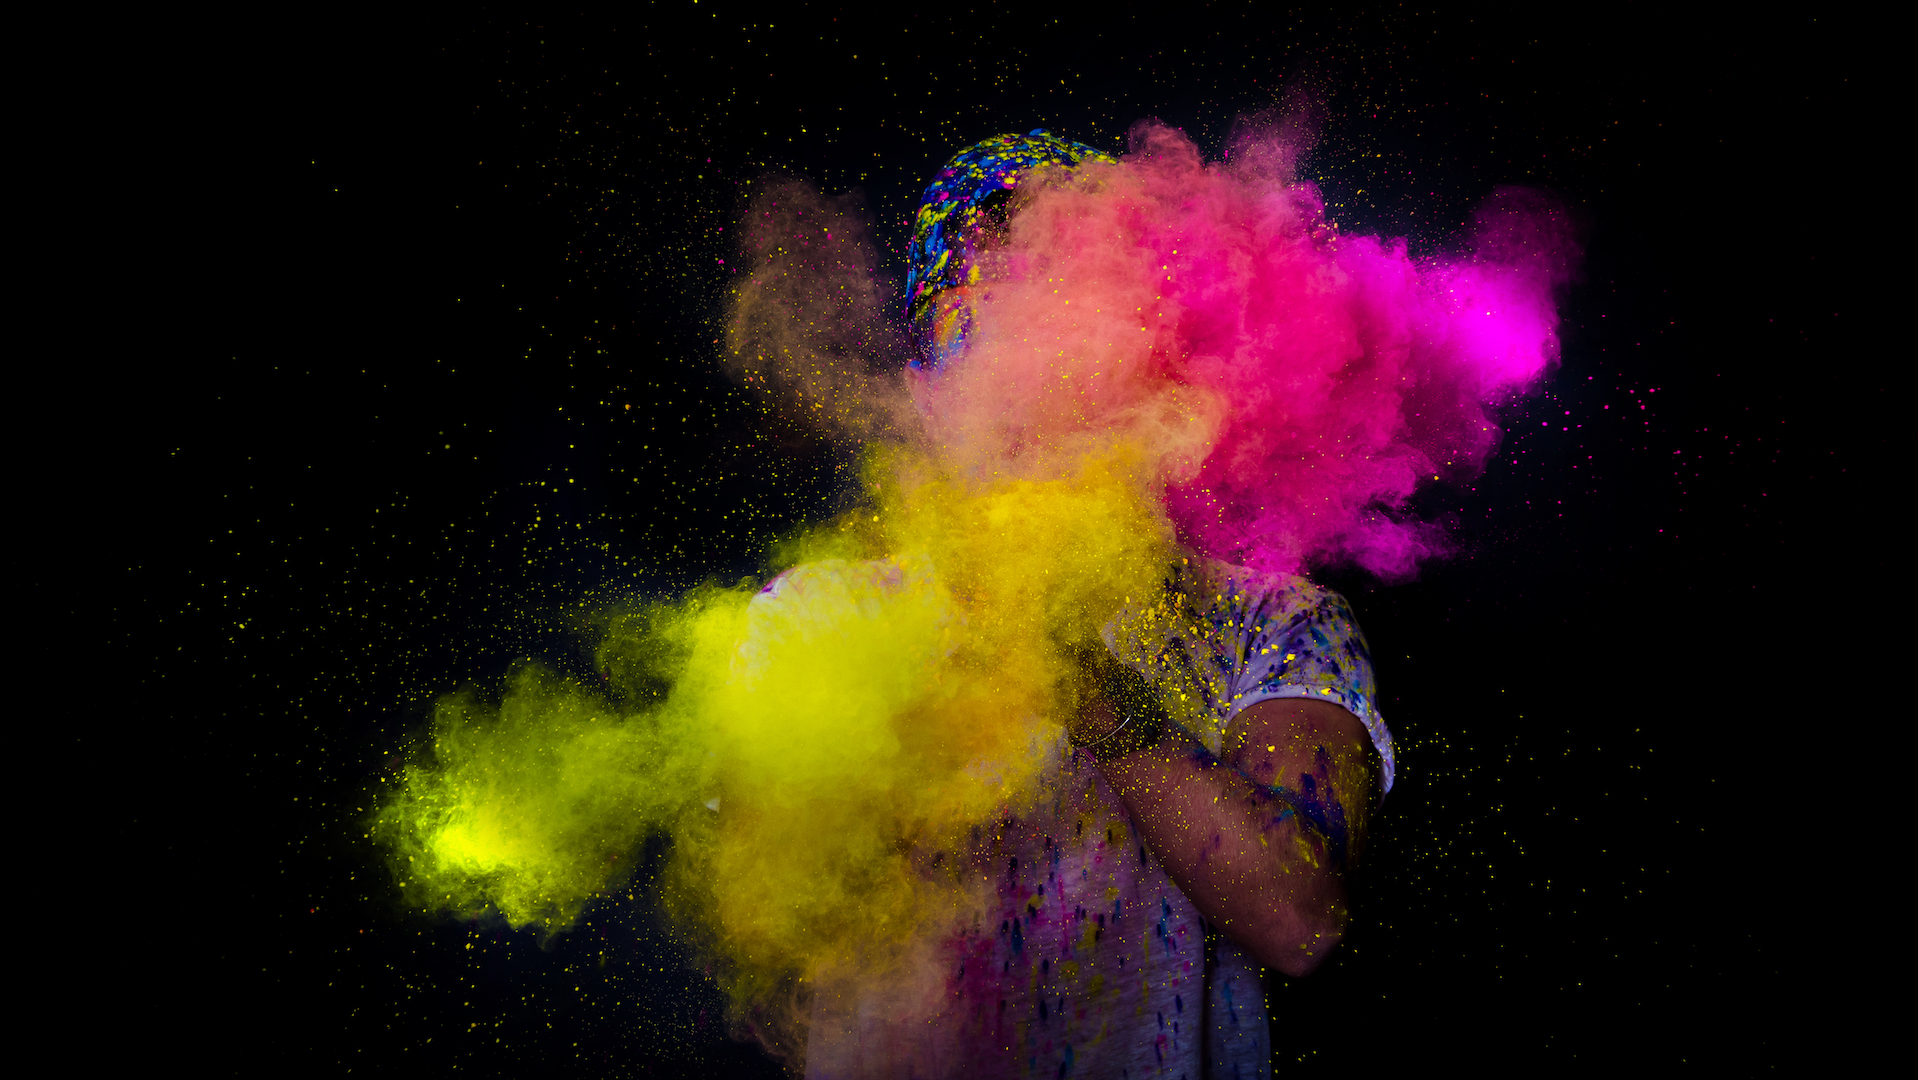 This week in Editors Choice: Bold colors, action shots, and one-eyed subjects